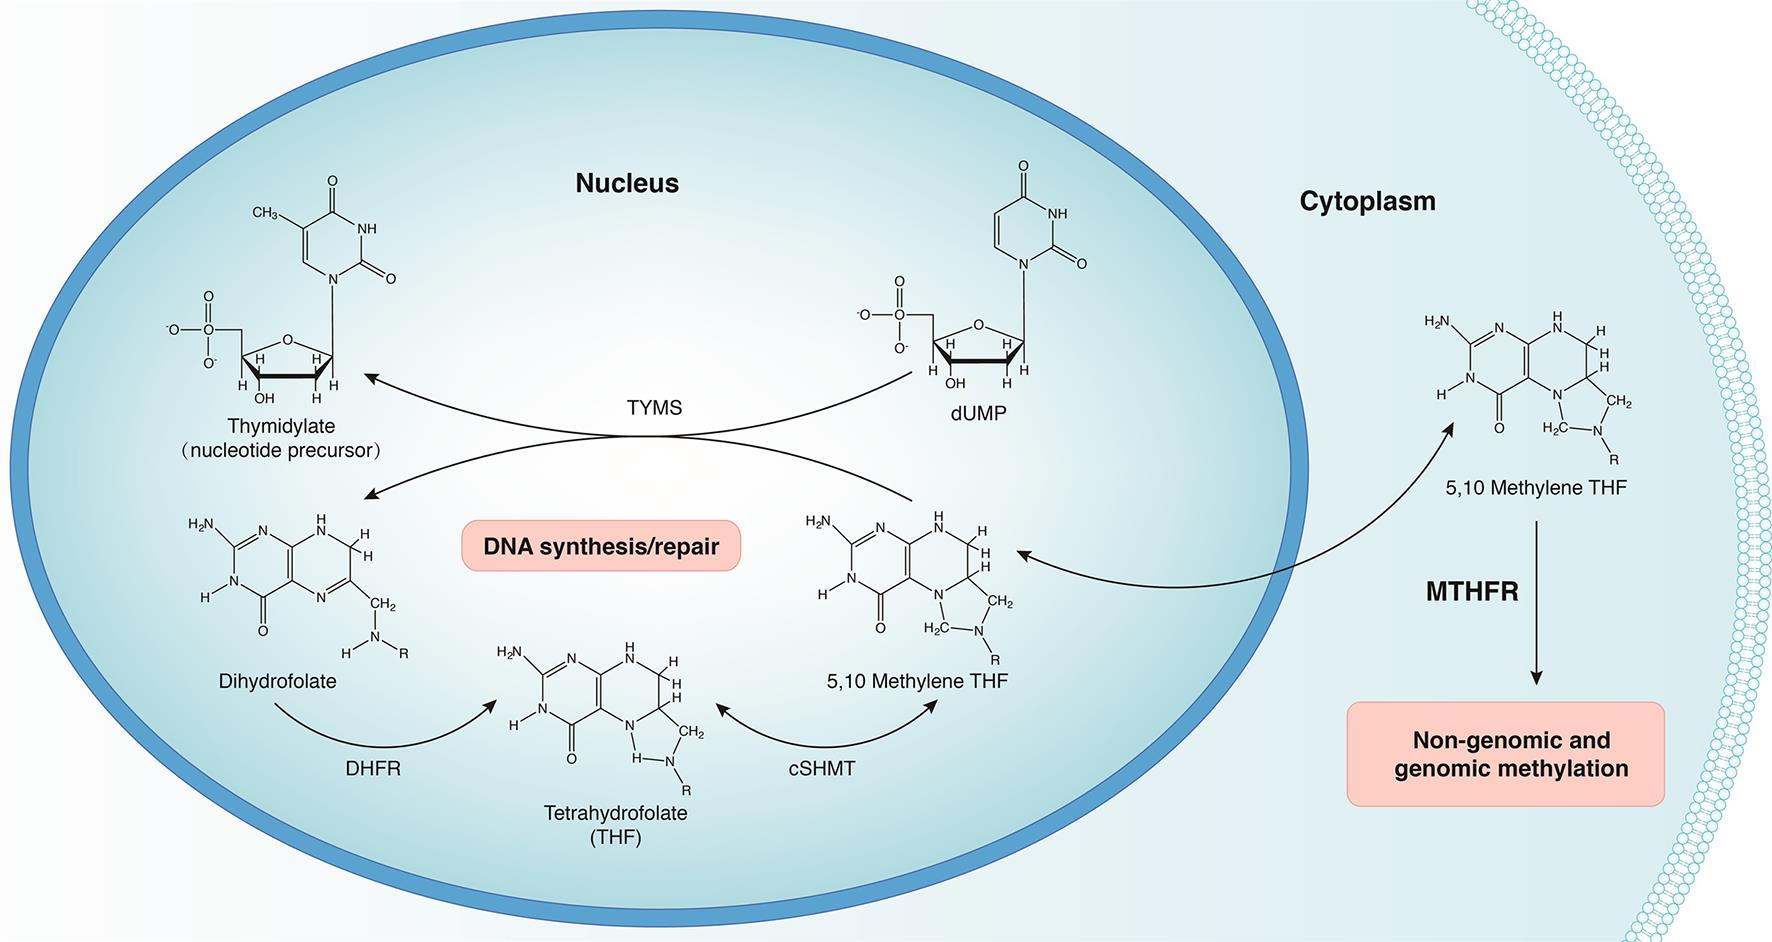 5,10-methyleneTHF synthesis and utilization in the cell.